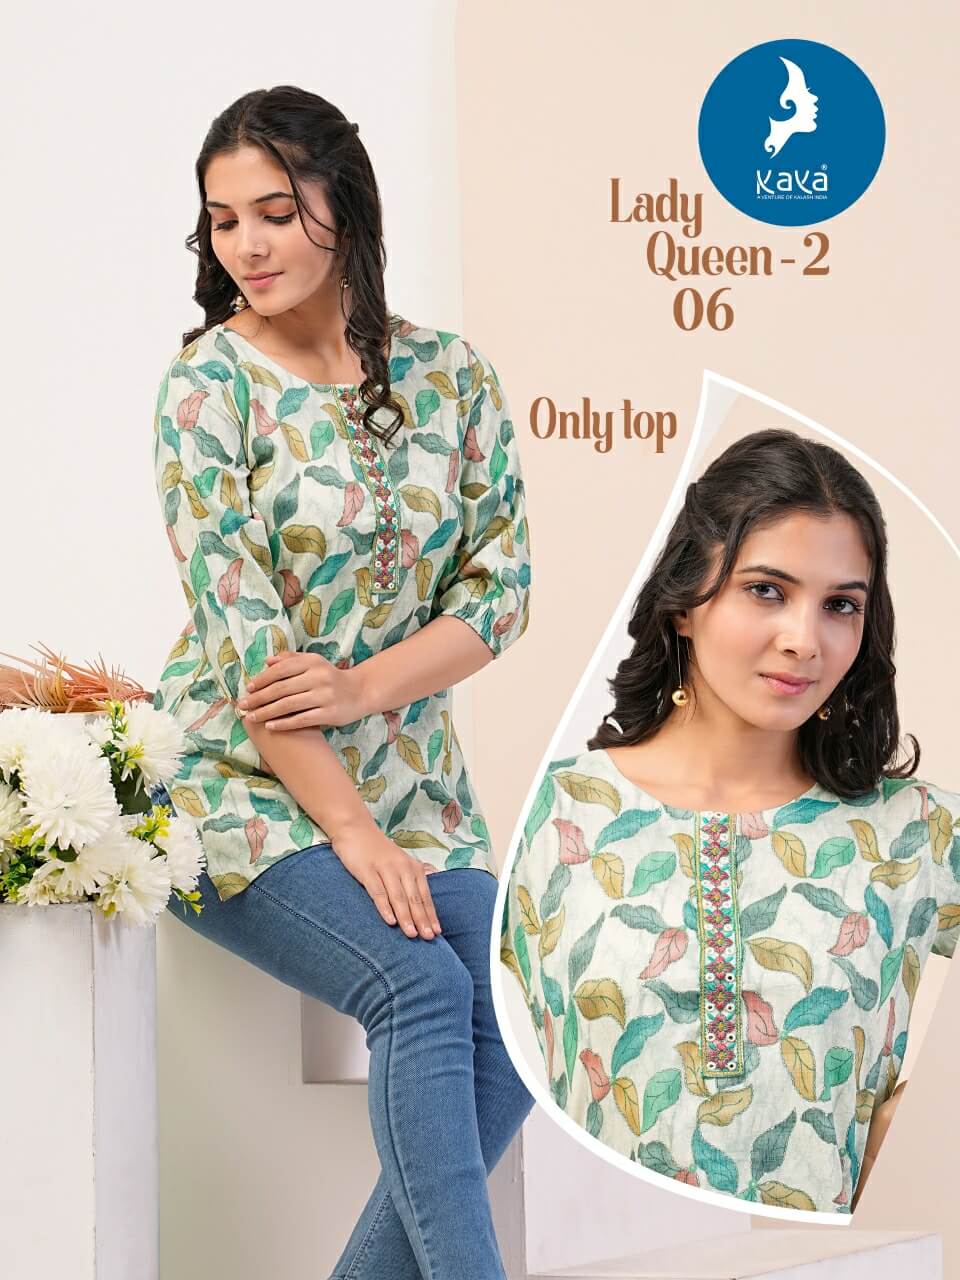 Kaya Lady Queen Vol 2 Ladies Tops Catalog collection 8